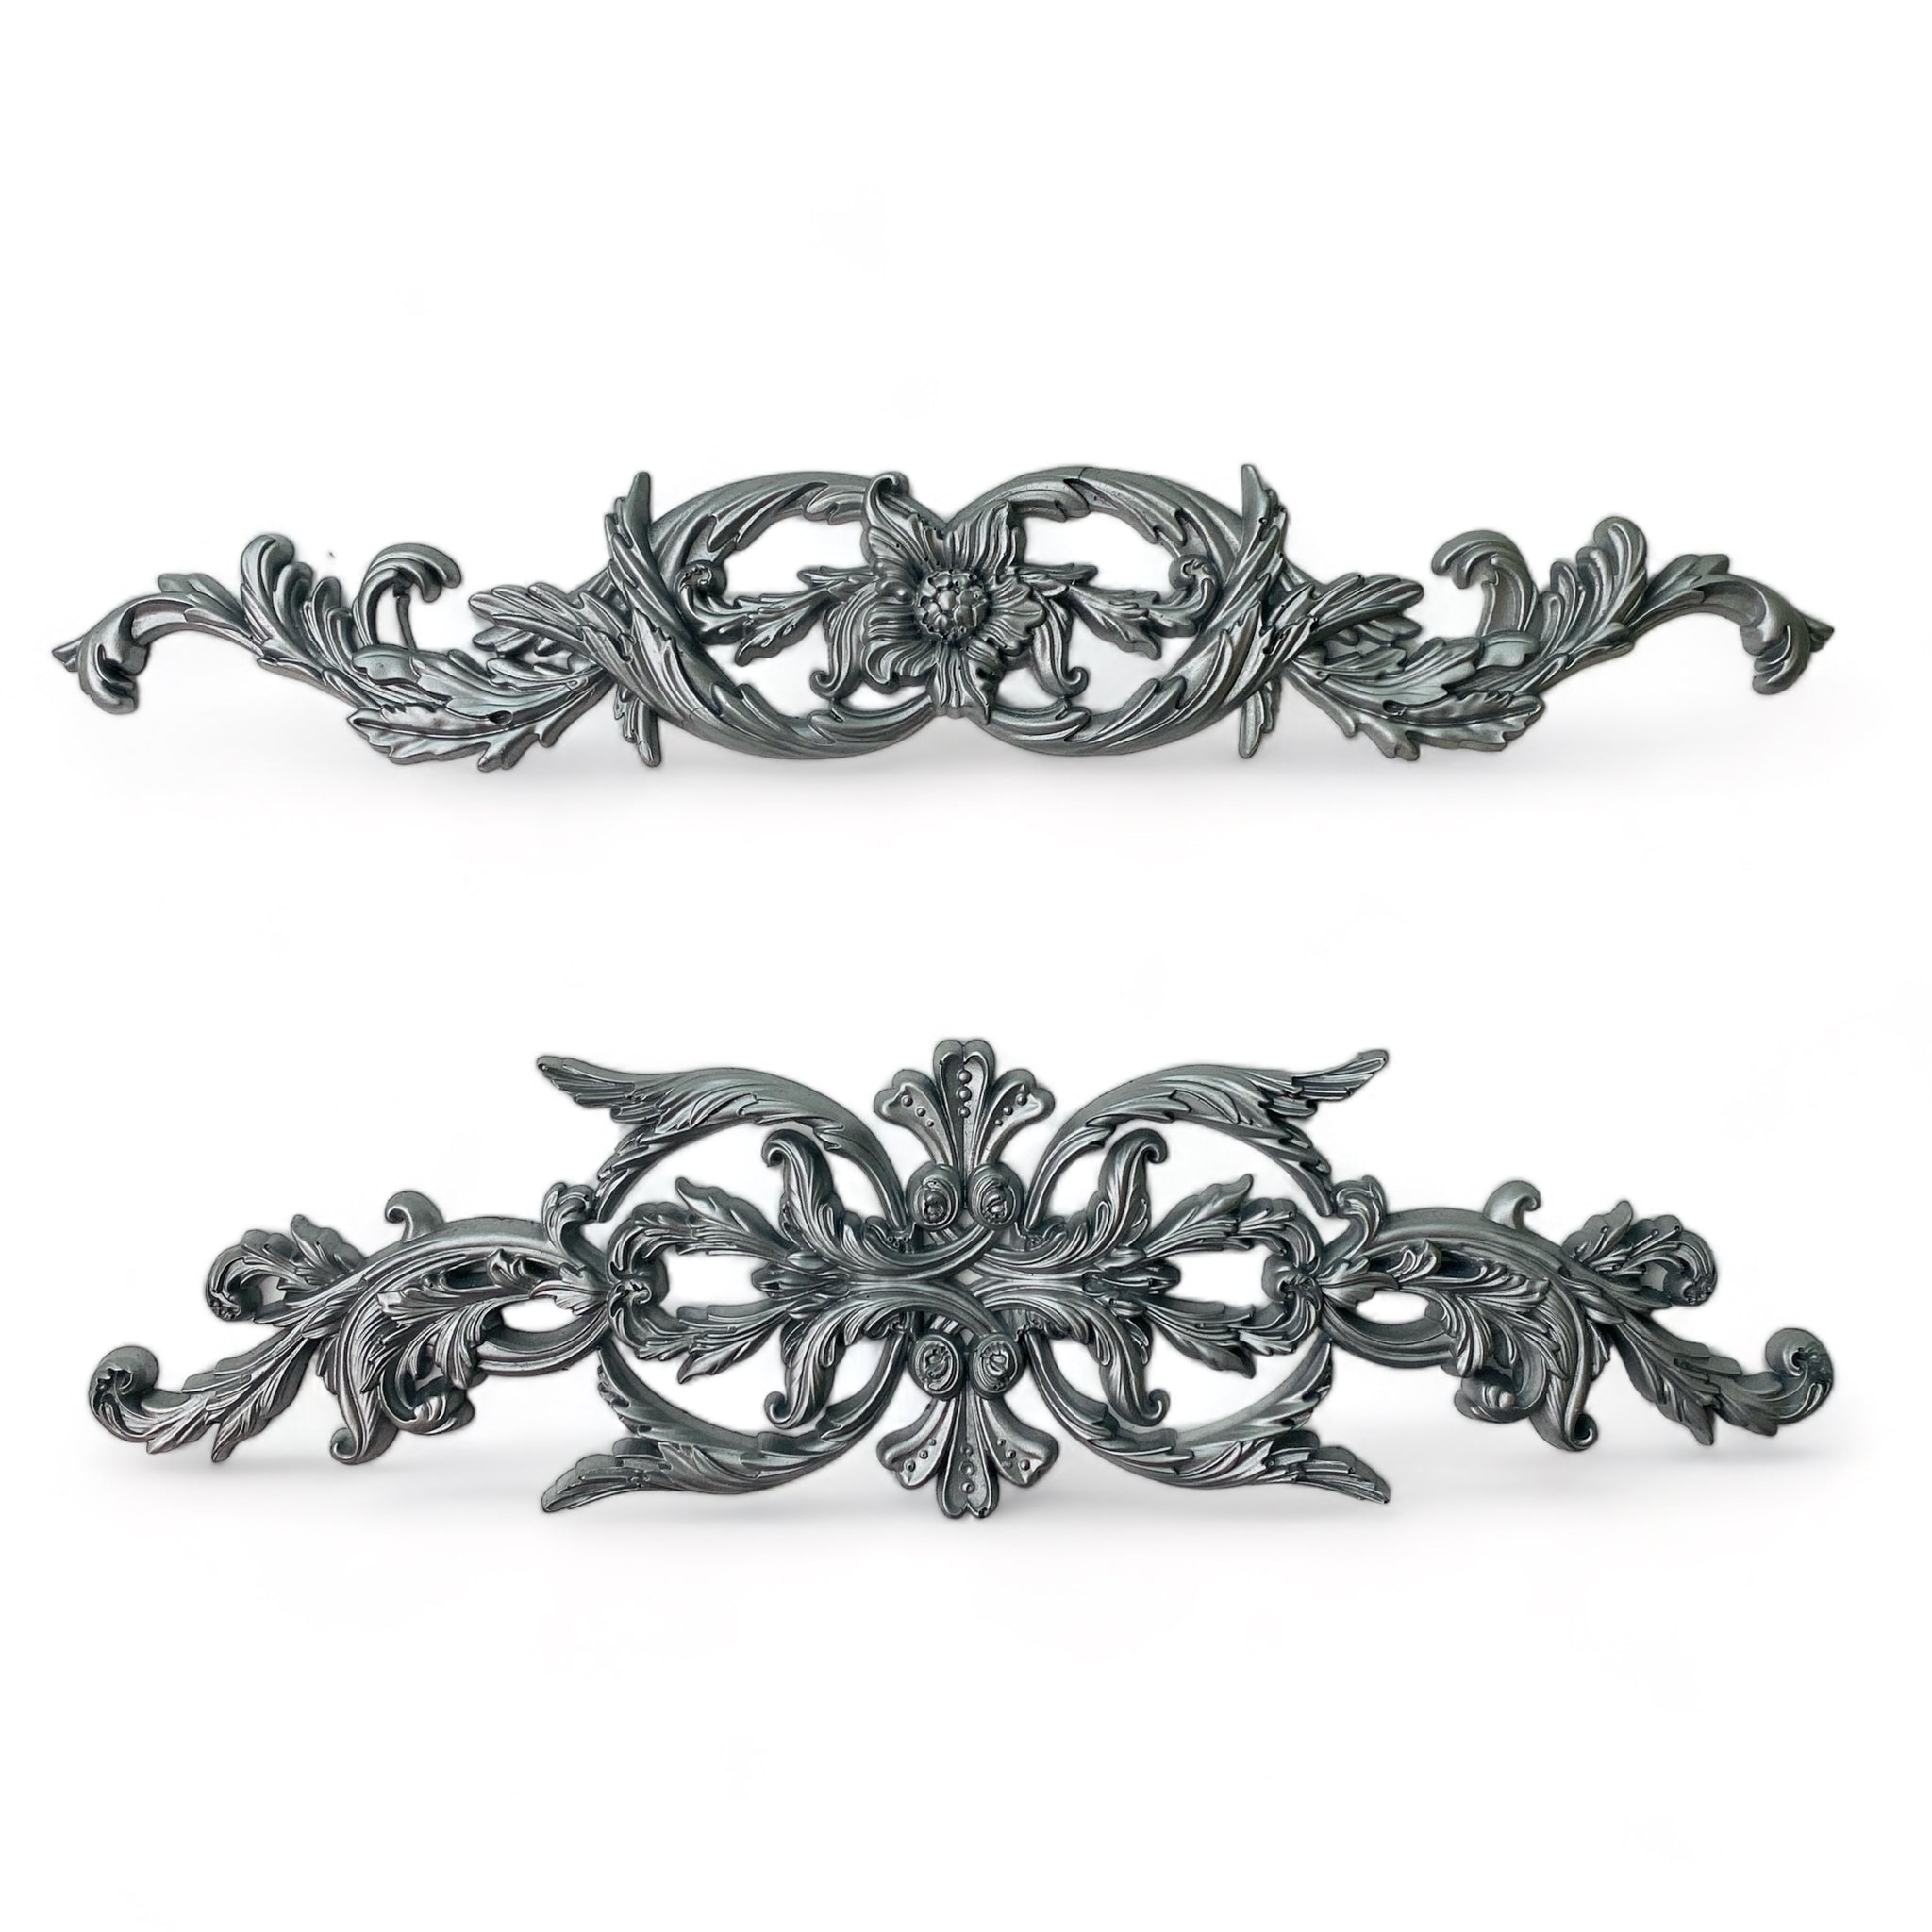 Silver colored castings of 2 ornate scrolls are against a white background.